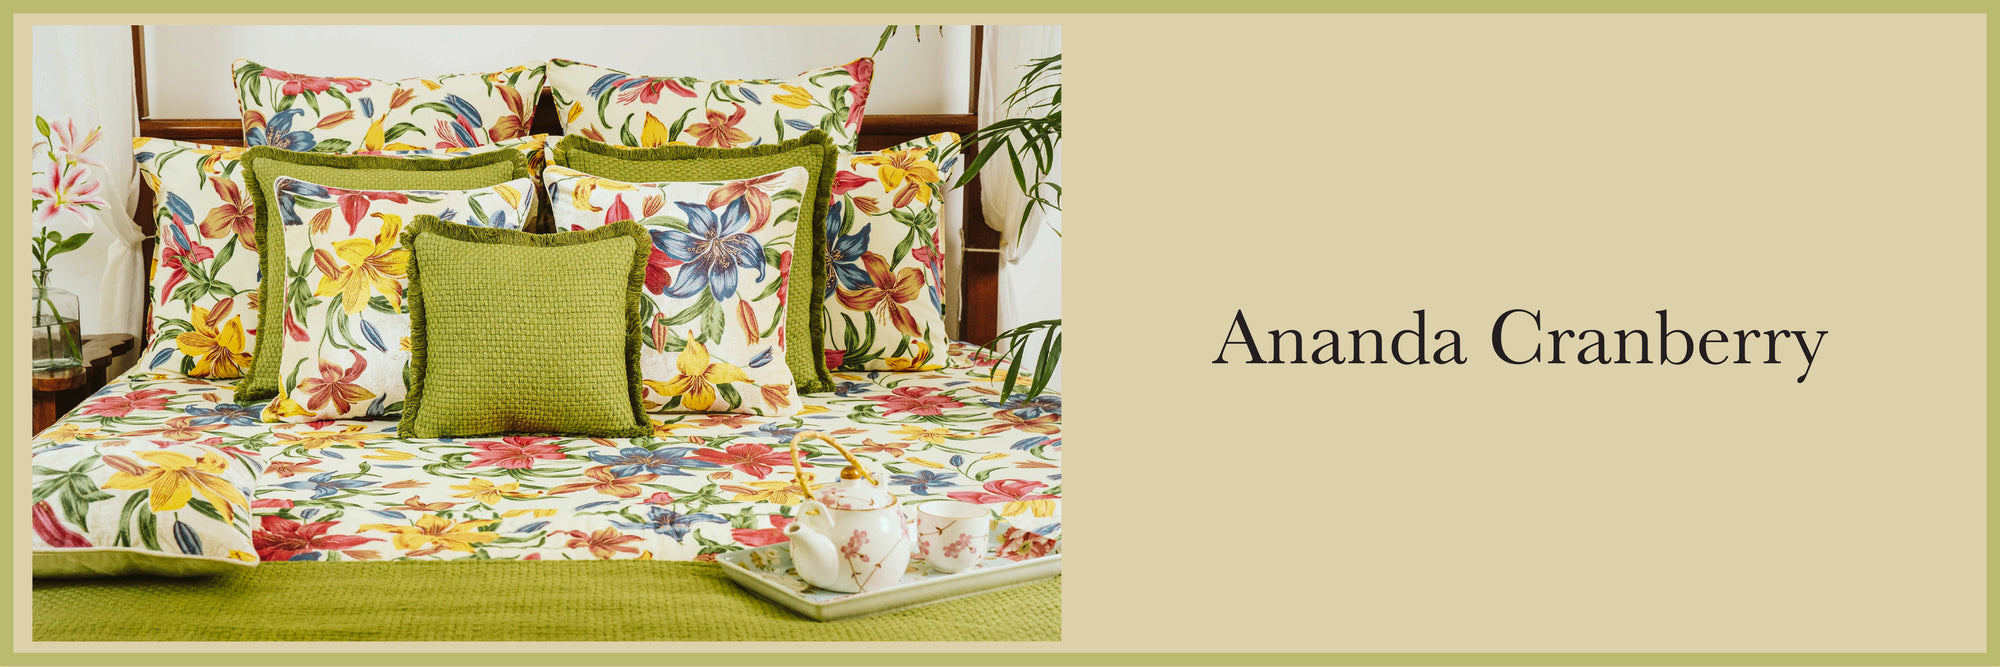 Ananda Cranberry Bedroom Collection